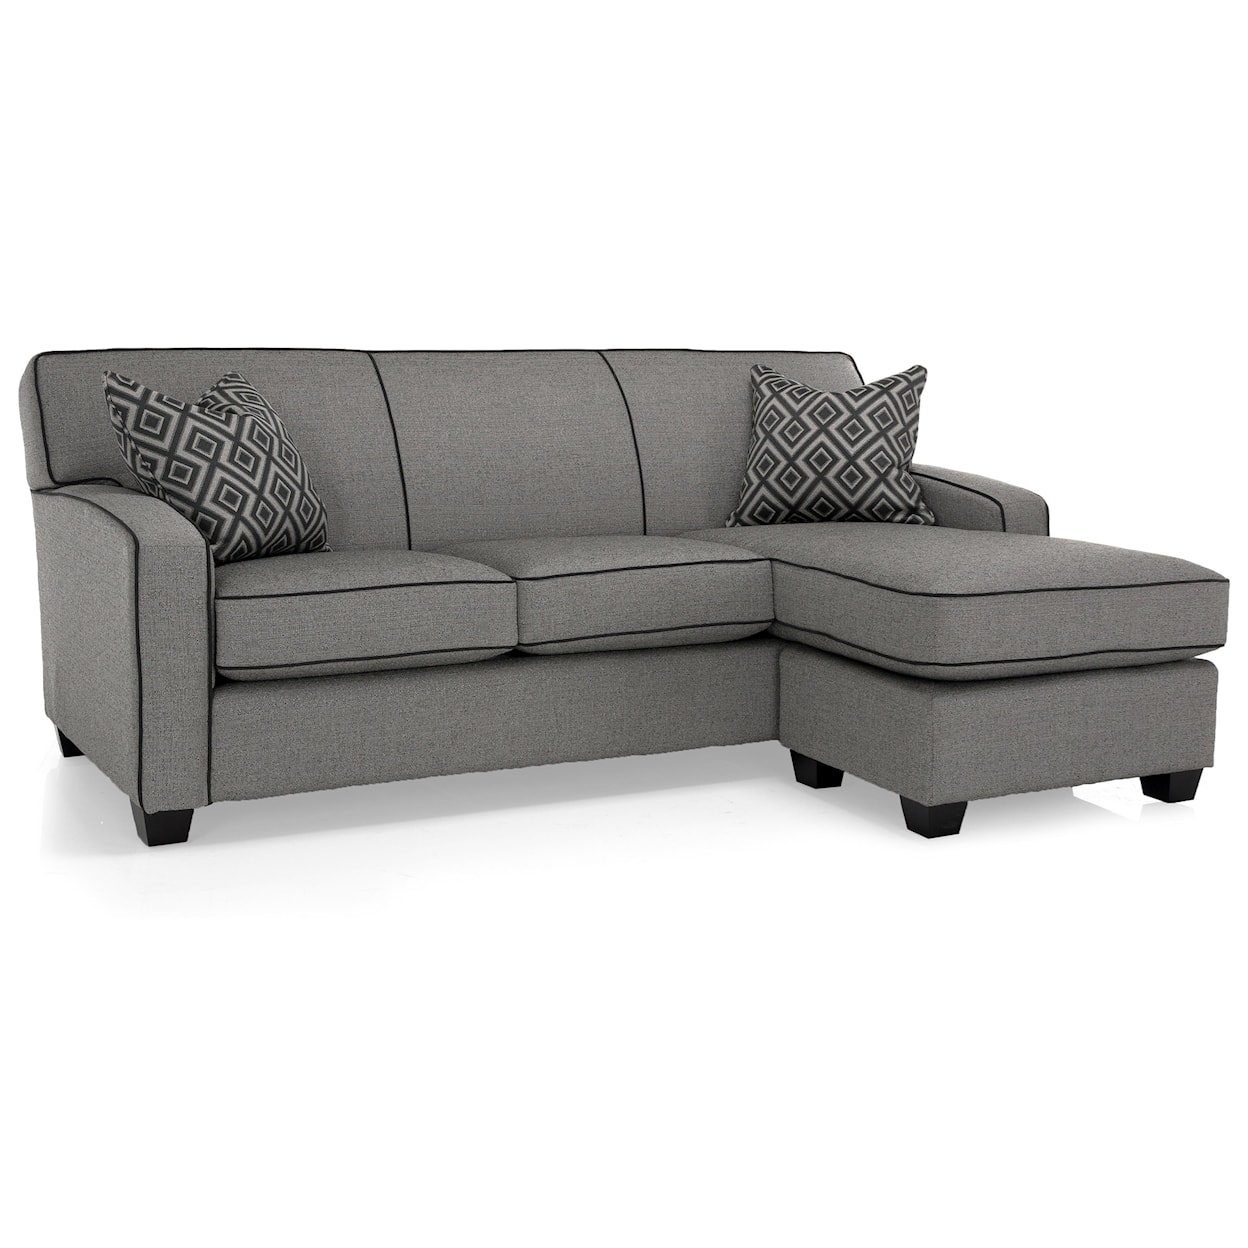 Decor-Rest 2401 Sofa with Chaise